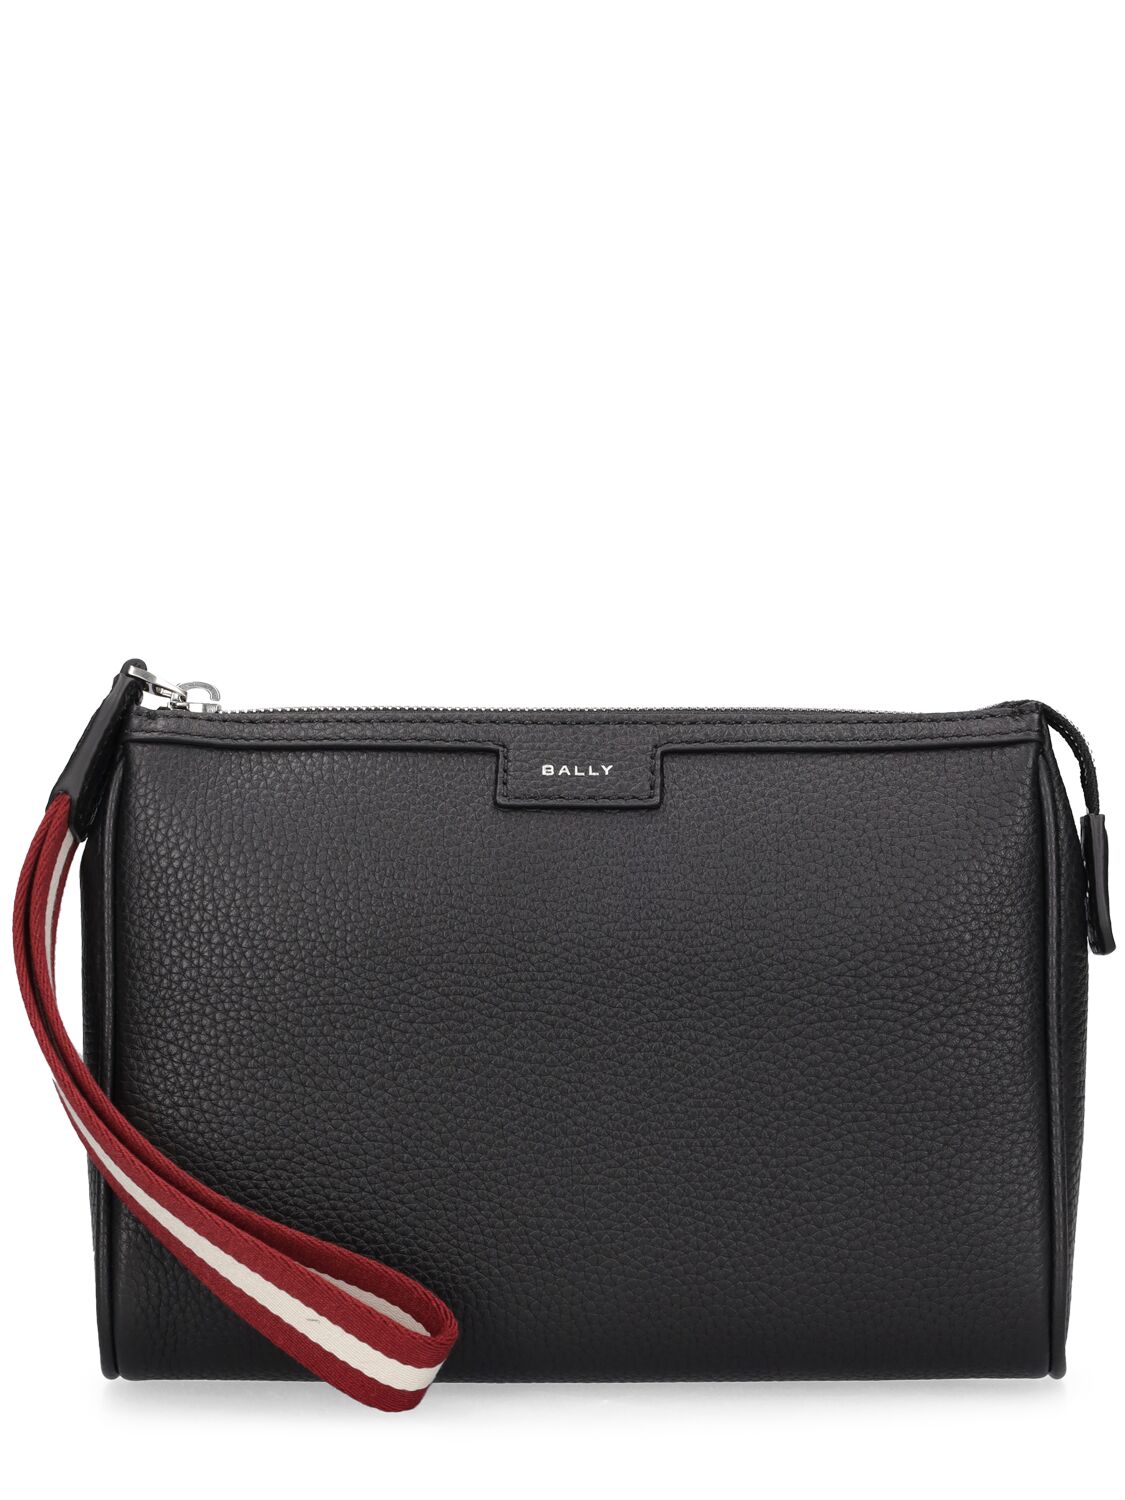 Bally Code Leather Clutch In Black